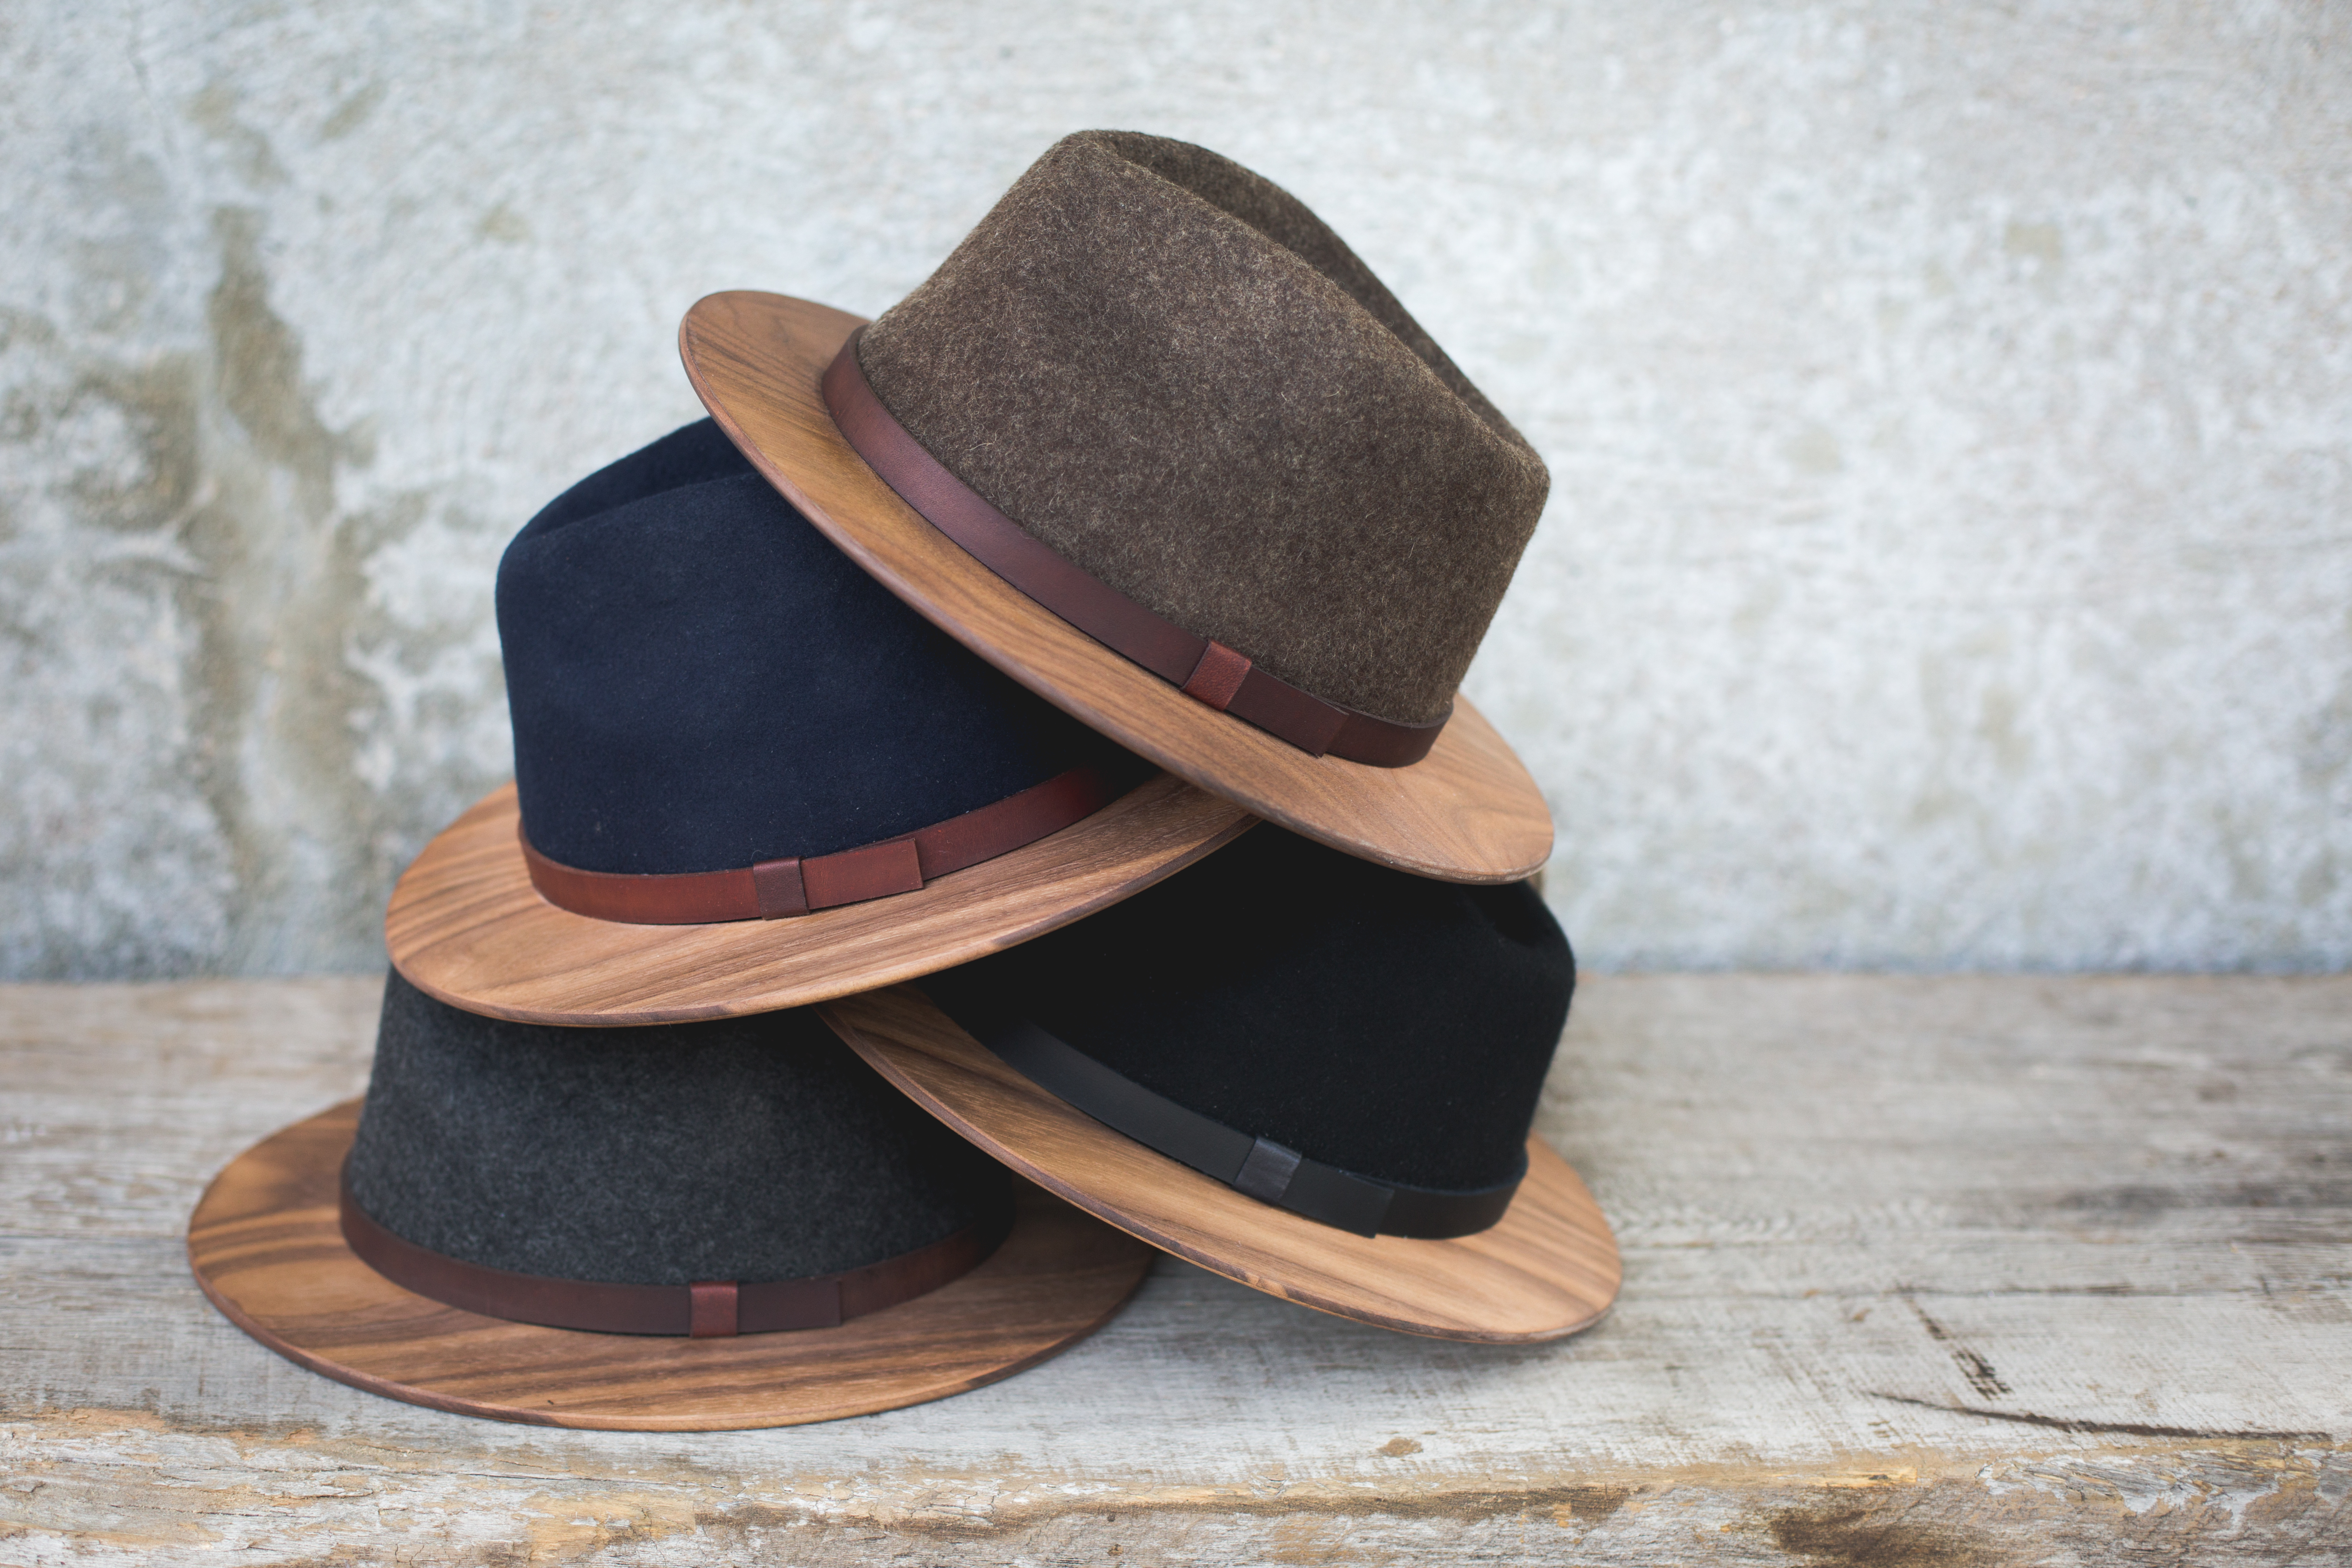 NEW Product: Wood-Brimmed Fedoras - Two Guys Bow Ties